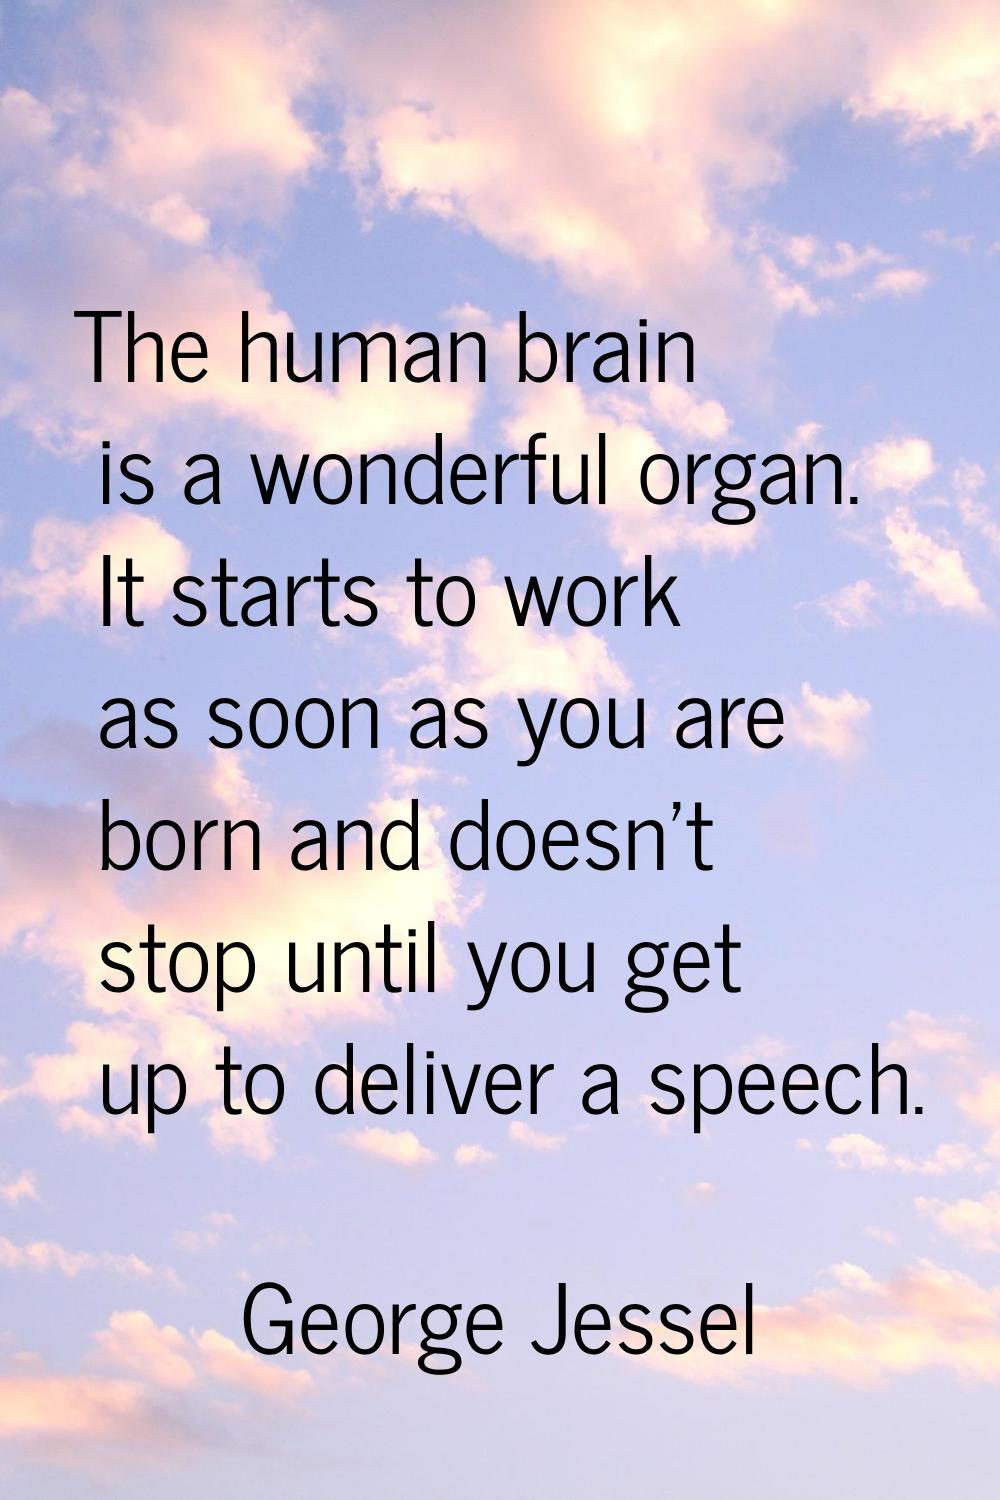 The human brain is a wonderful organ. It starts to work as soon as you are born and doesn't stop un